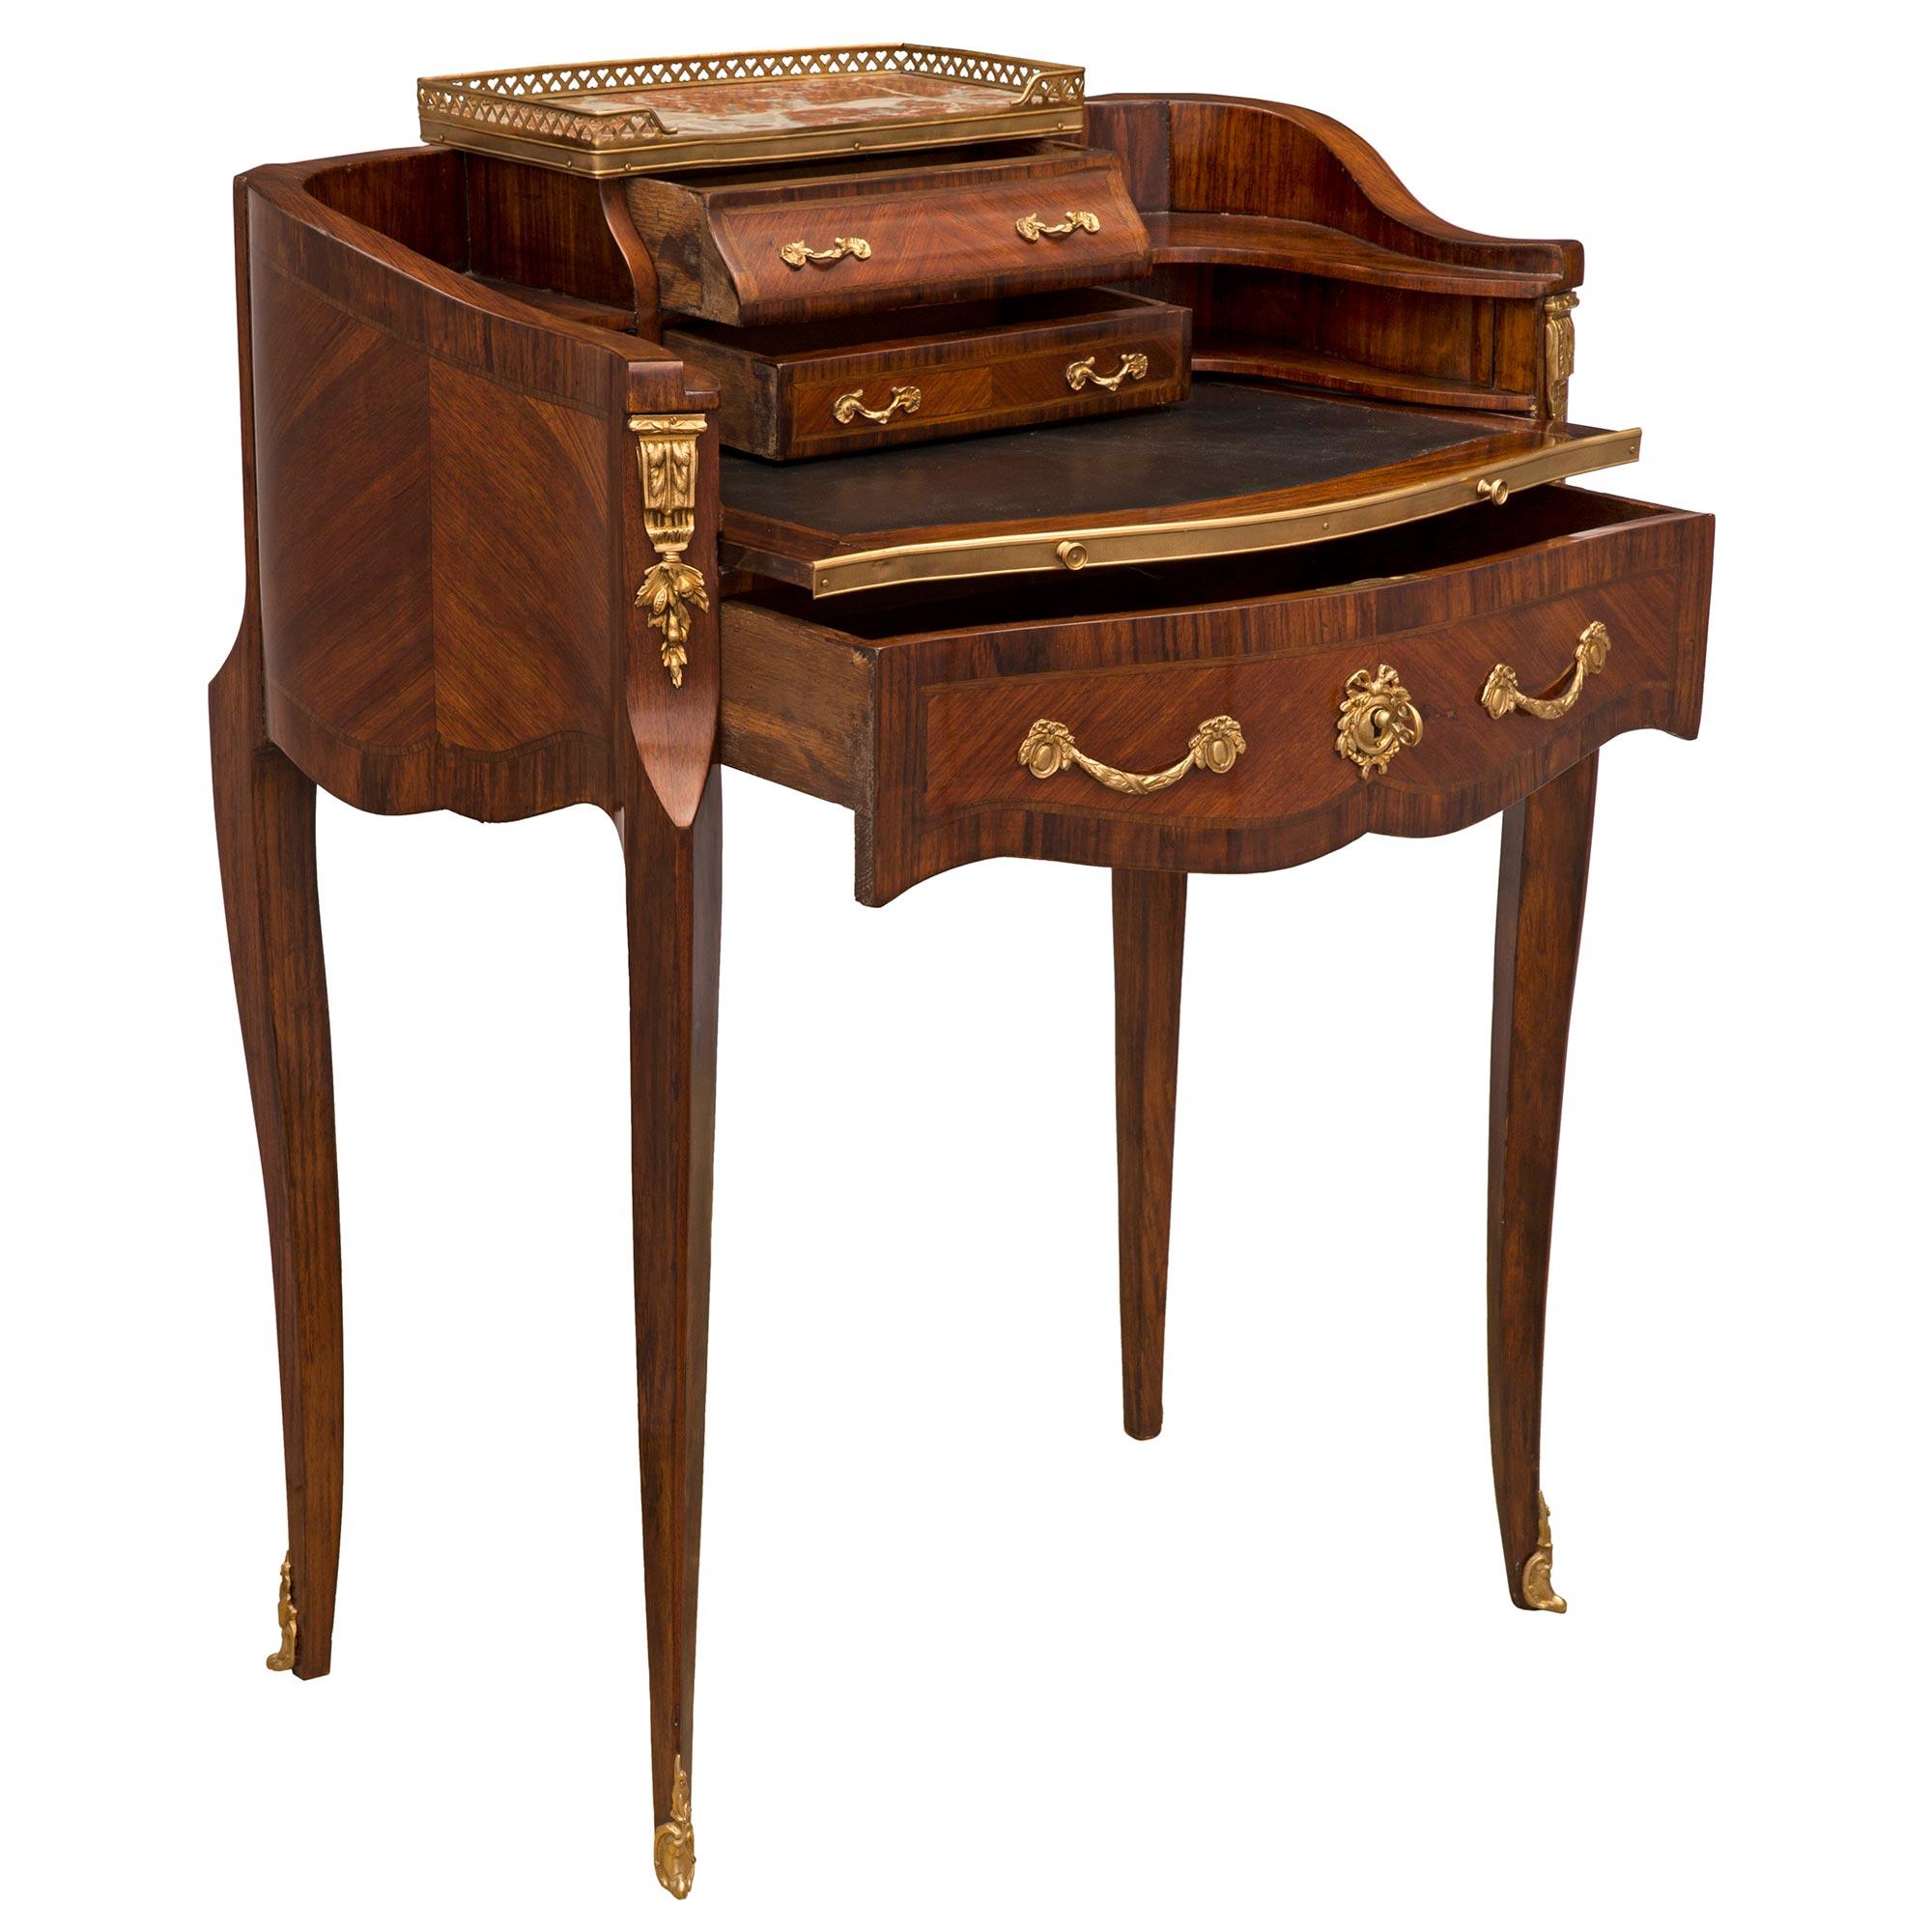 French 19th Century Transitional St. Kingwood, Tulipwood and Ormolu Desk In Good Condition For Sale In West Palm Beach, FL